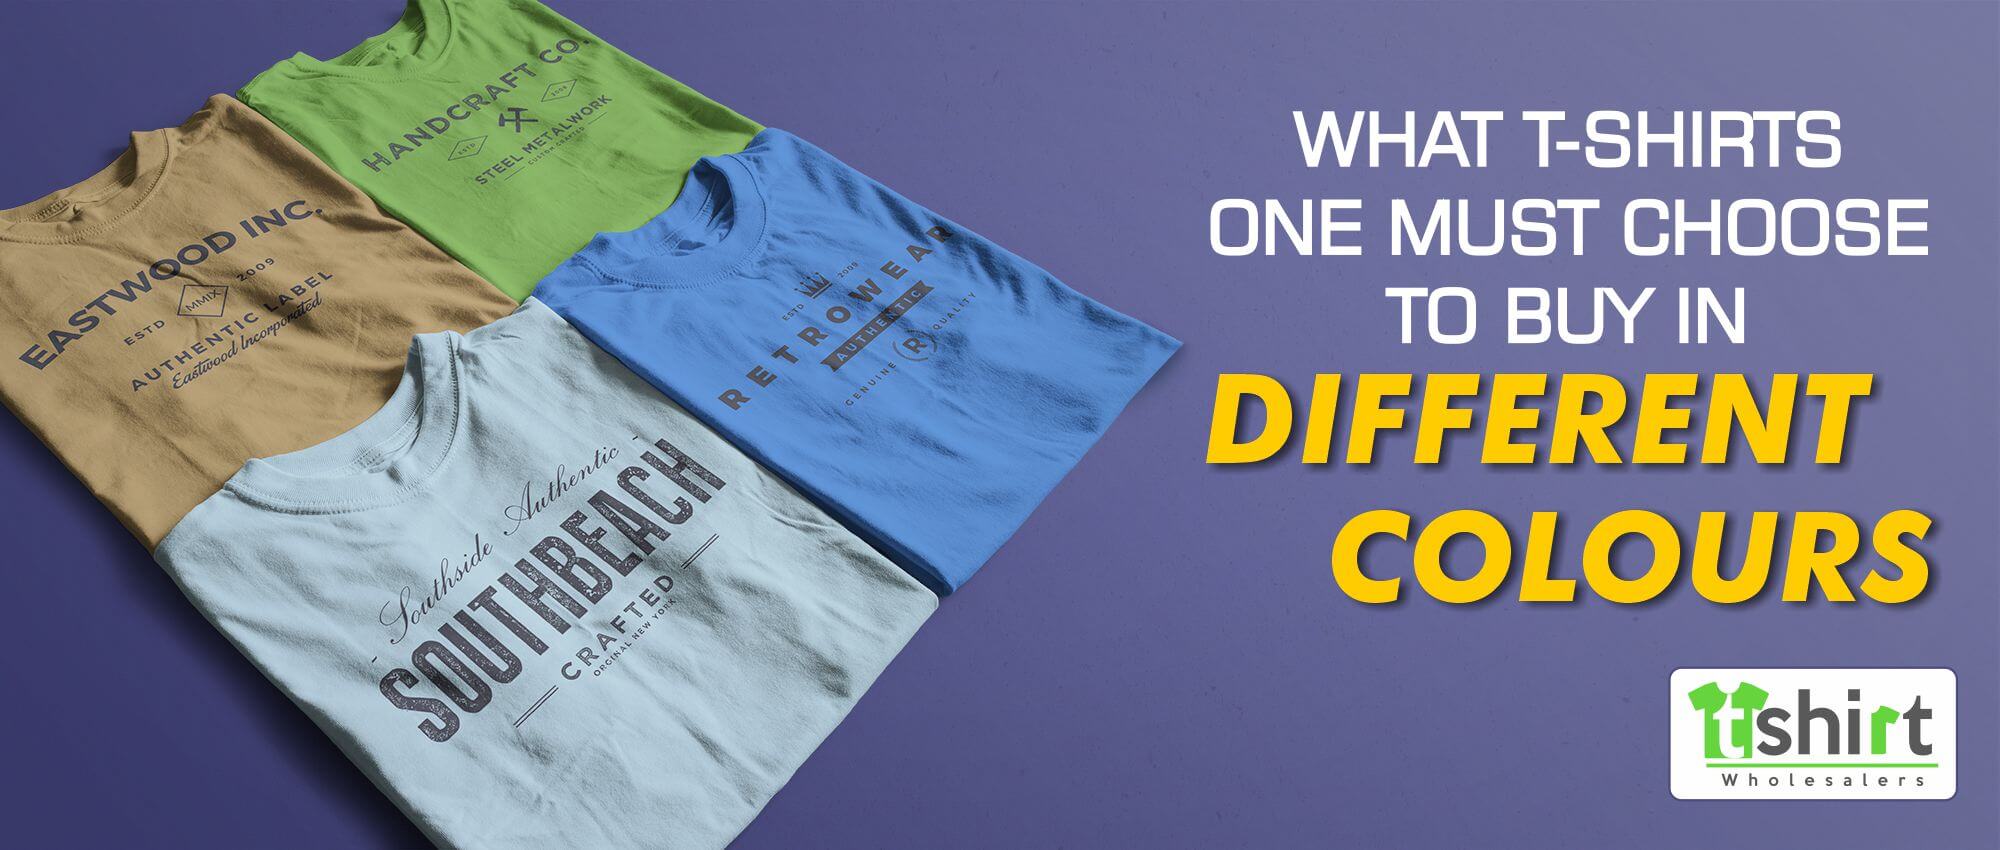 WHAT T-SHIRTS ONE MUST CHOOSE TO BUY IN DIFFERENT COLORS